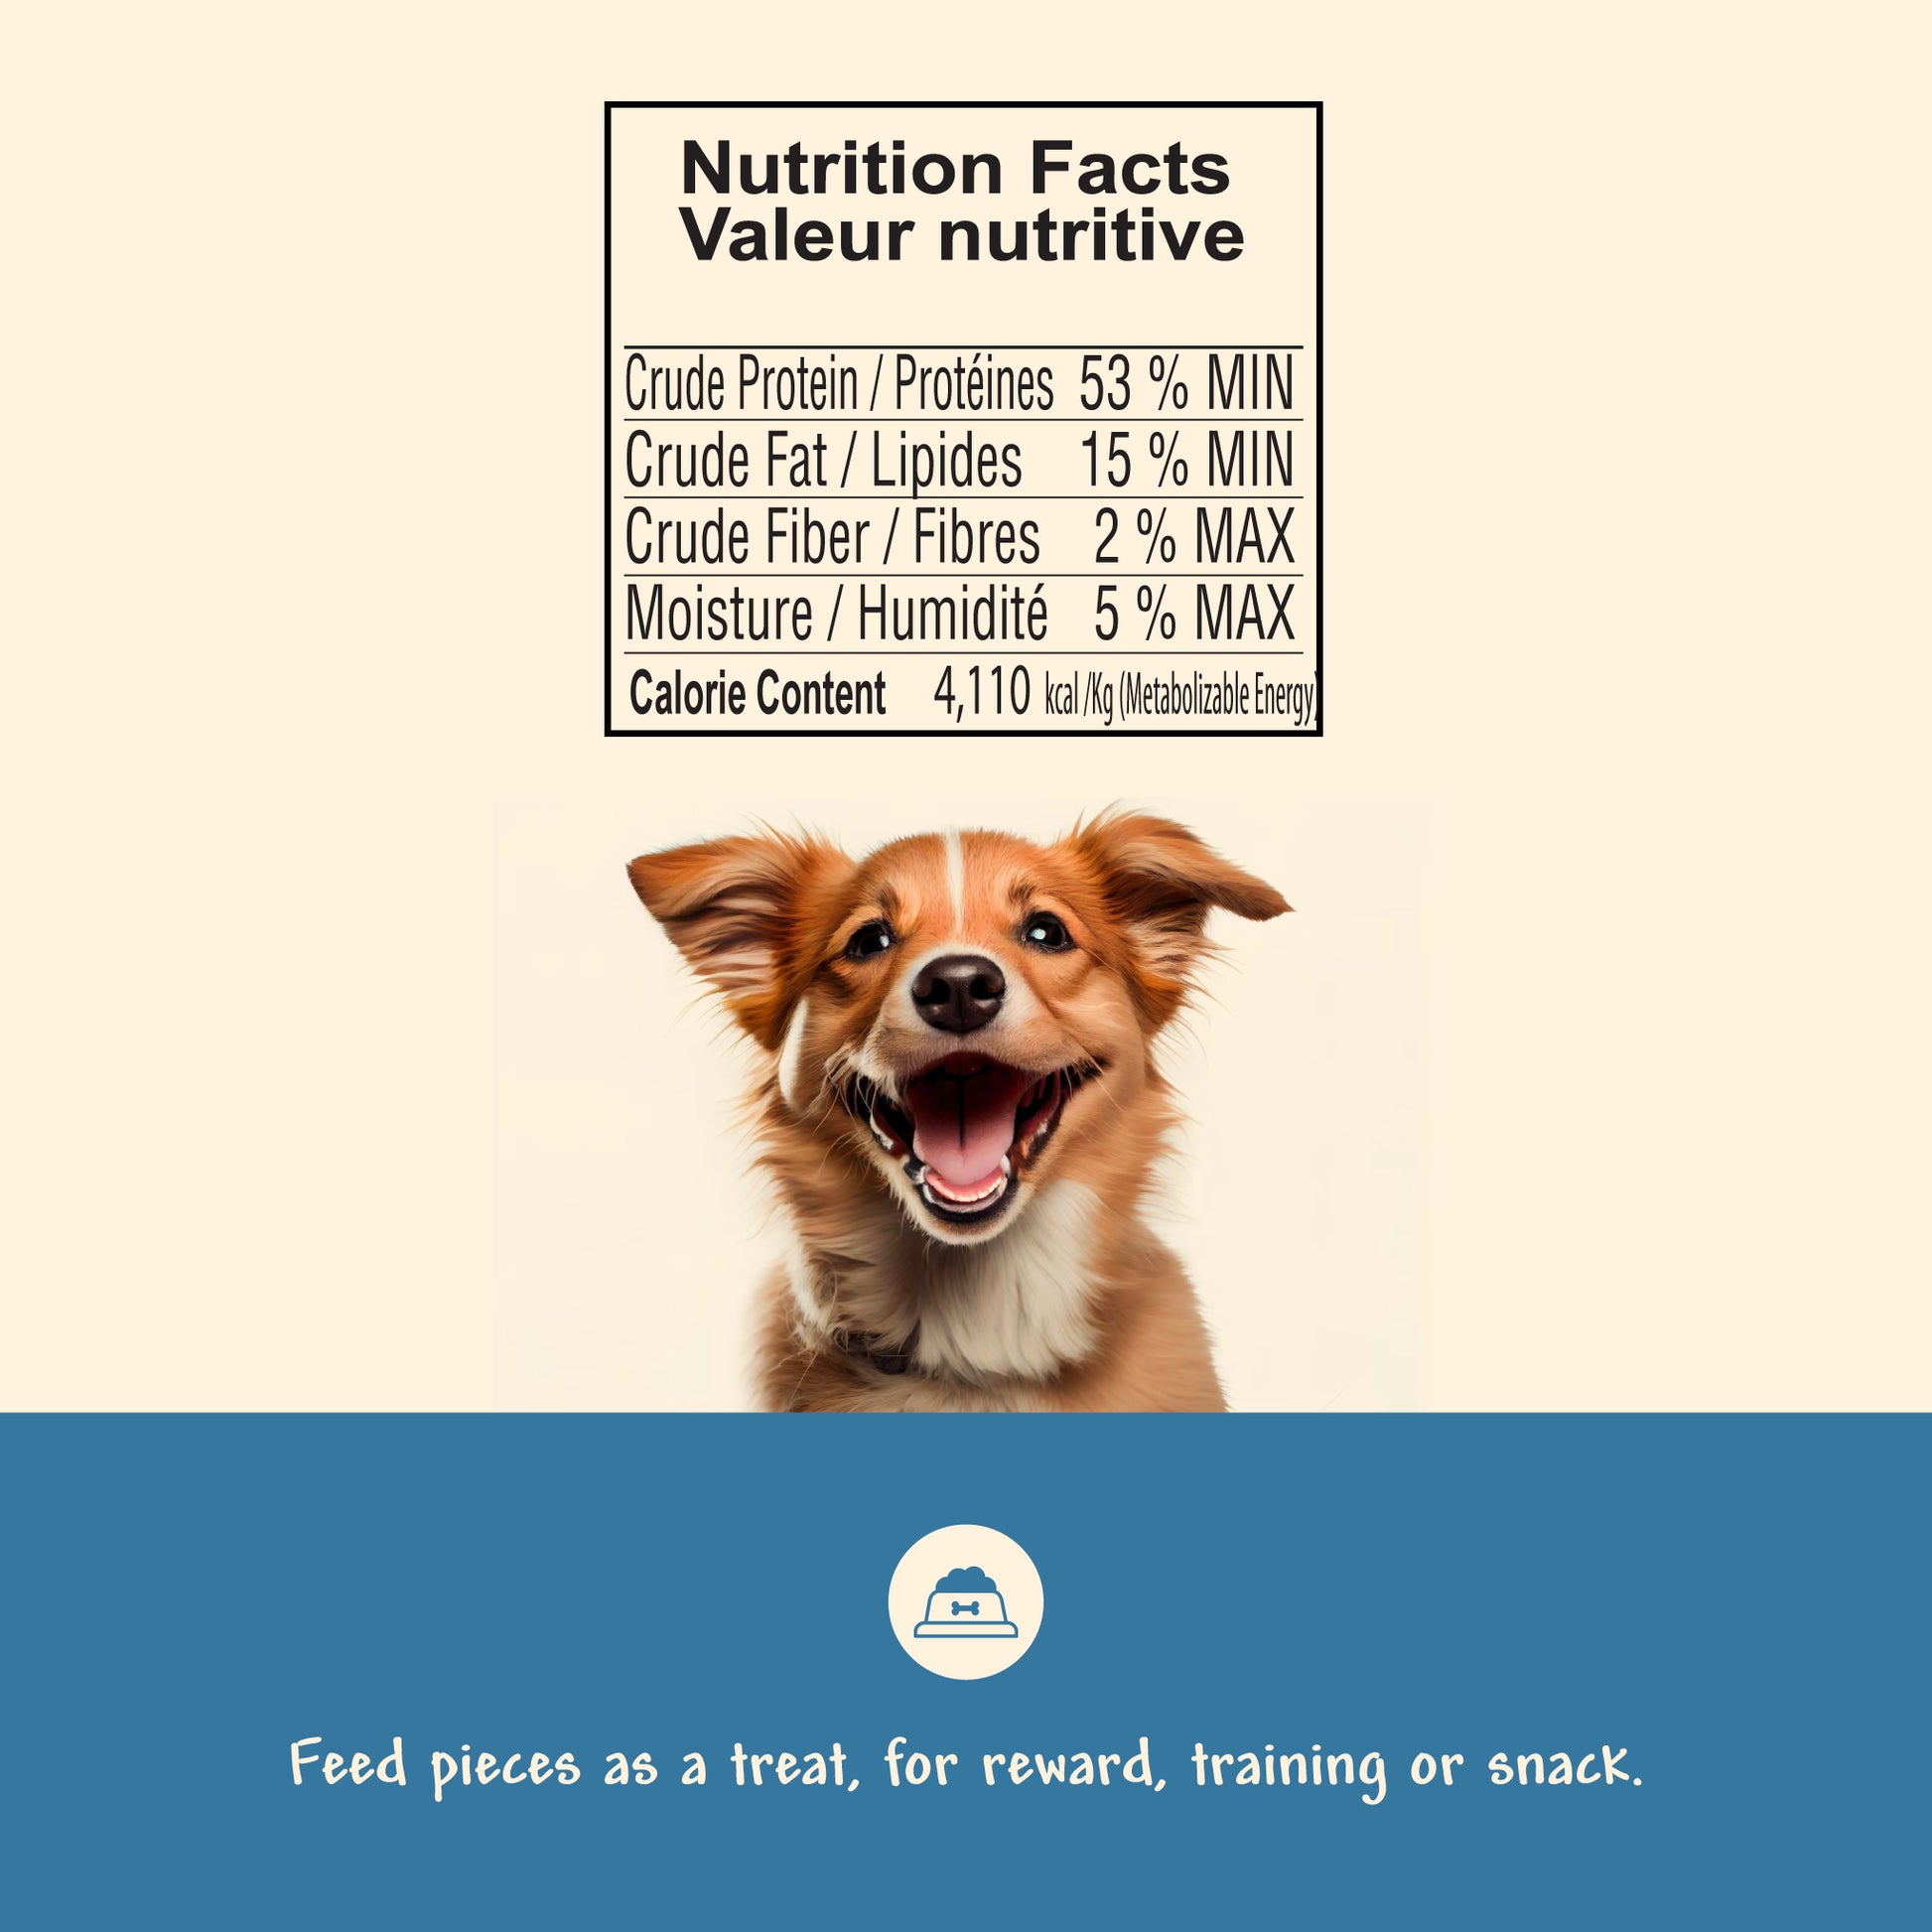 nutrition facts and directions to feed pieces as a treat, reward, training or snack for dogs